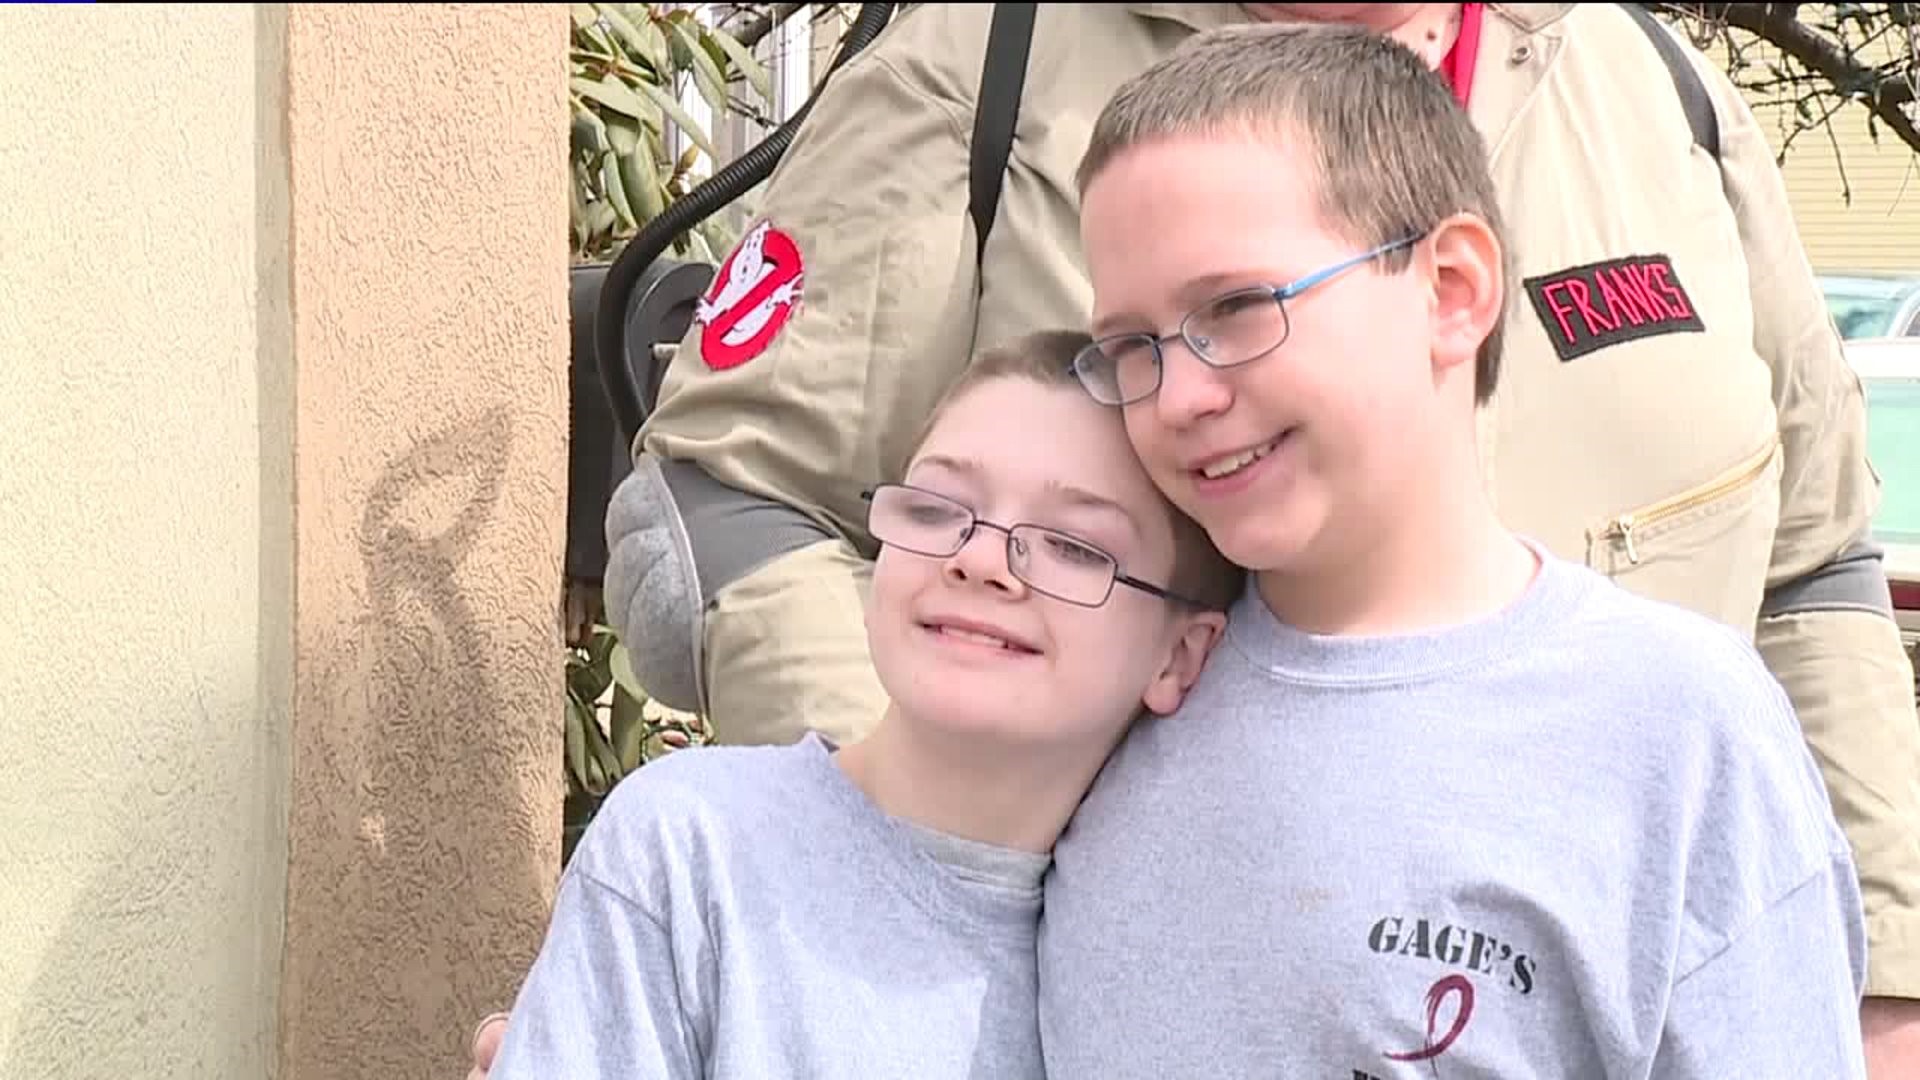 Fundraiser for 12-year-old Boy from Scranton with Autism and Brain Disorder